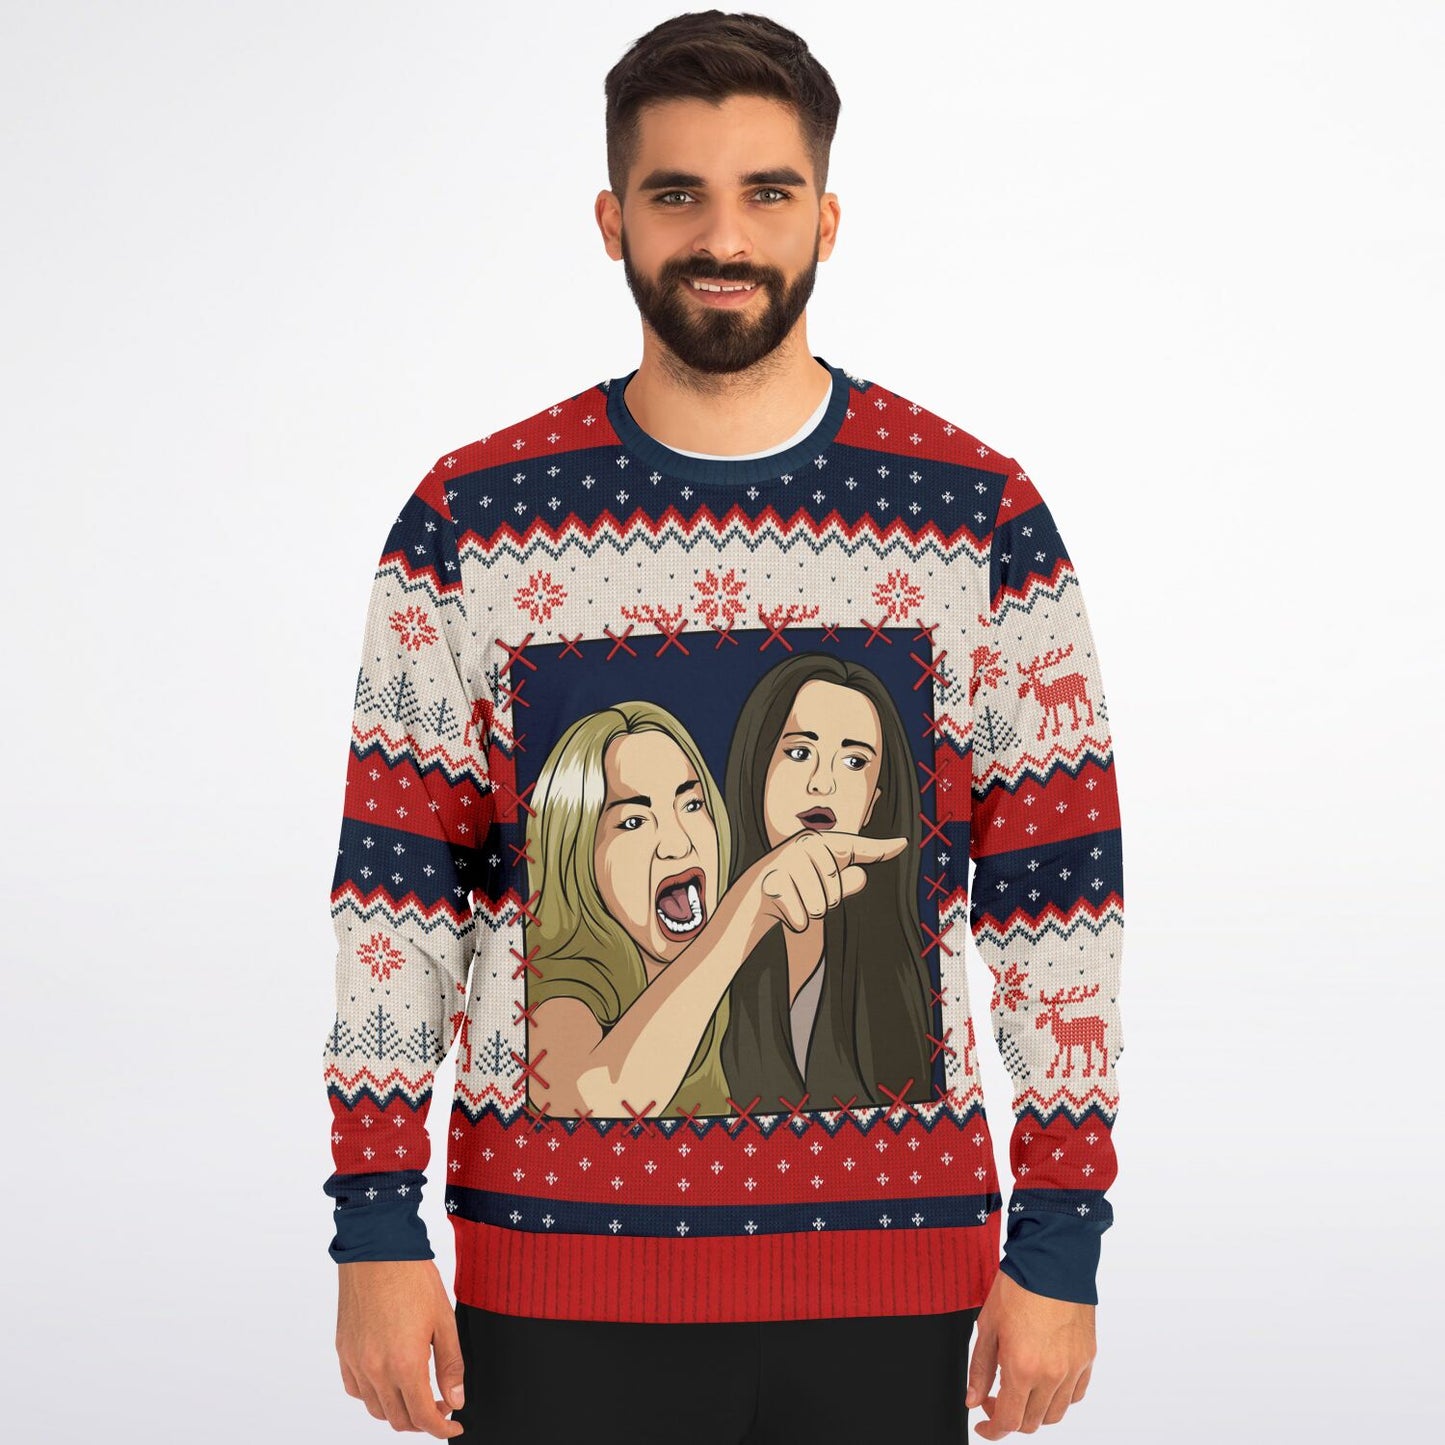 Woman yells at Cat (Person 1) - Ugly Christmas Sweater